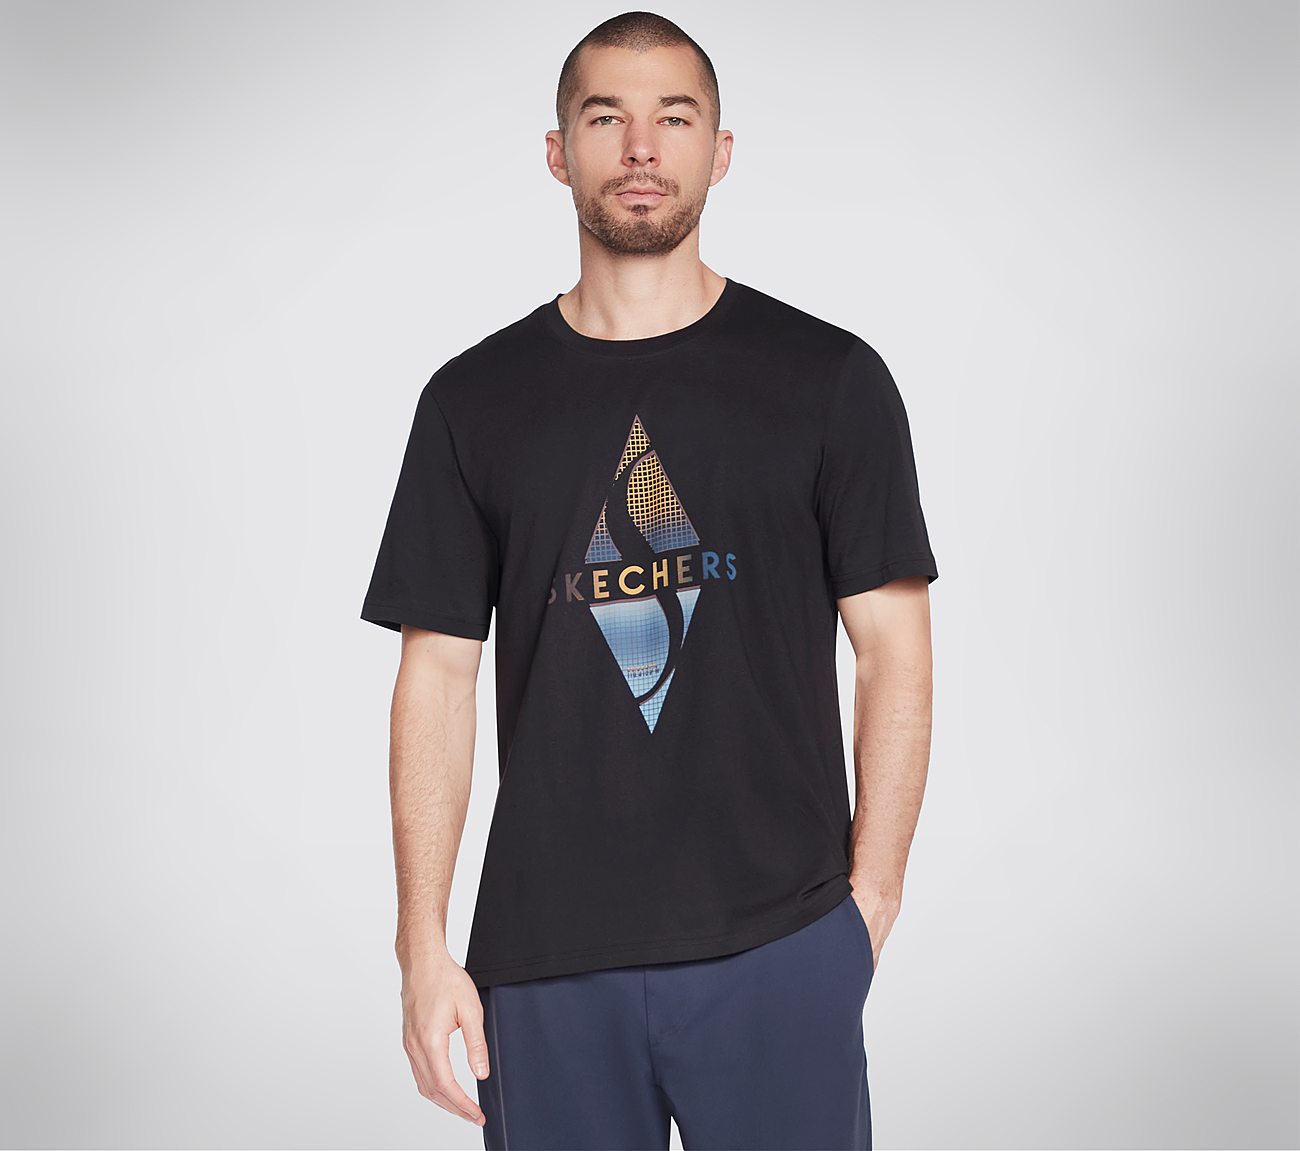 SKECHERS RECHARGE SS TEE, BBBBLACK Apparels Lateral View